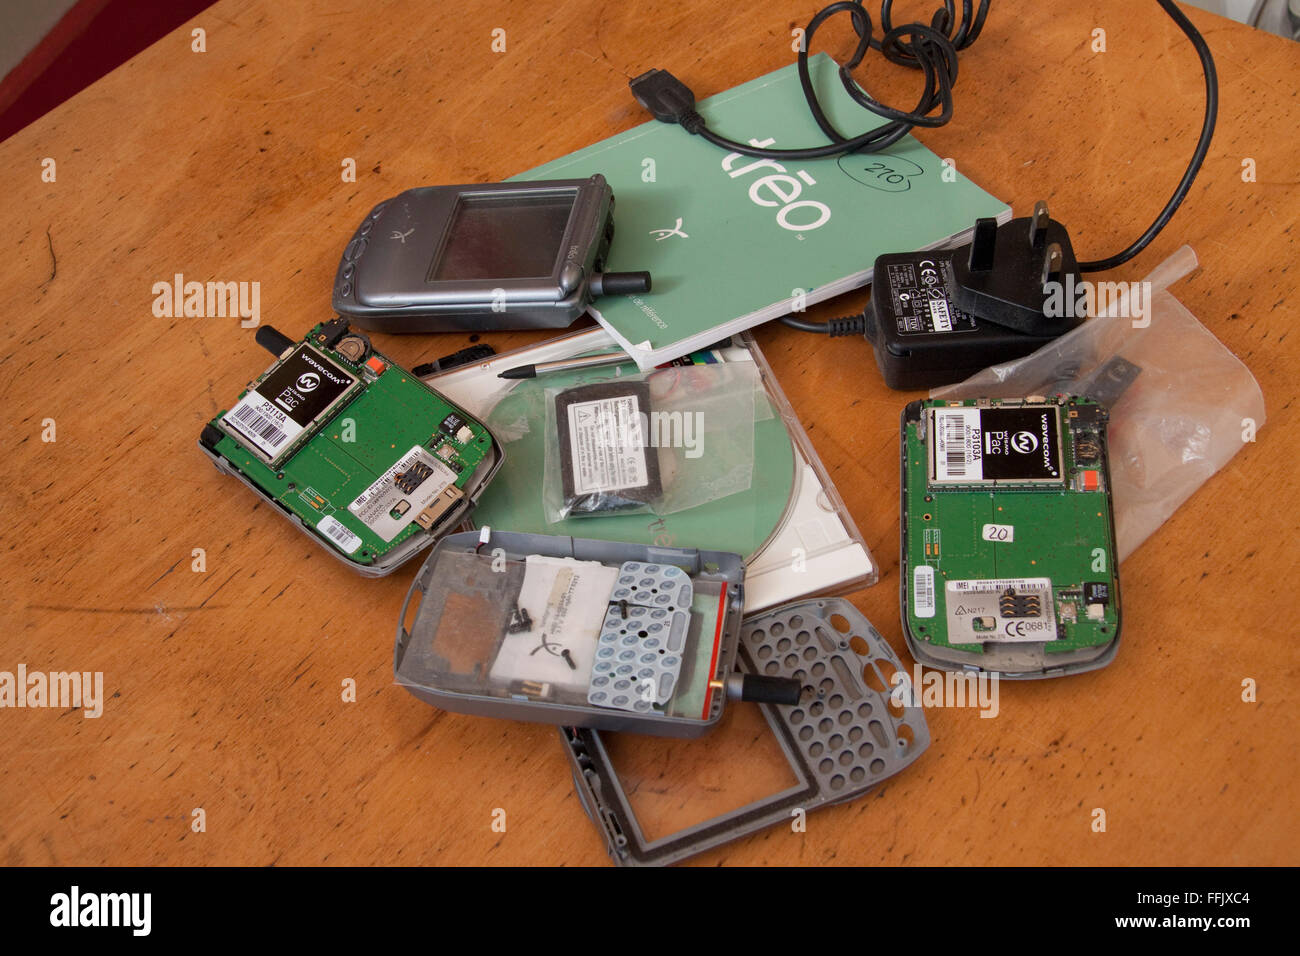 Pile of Handspring Treo smart phones and components Stock Photo